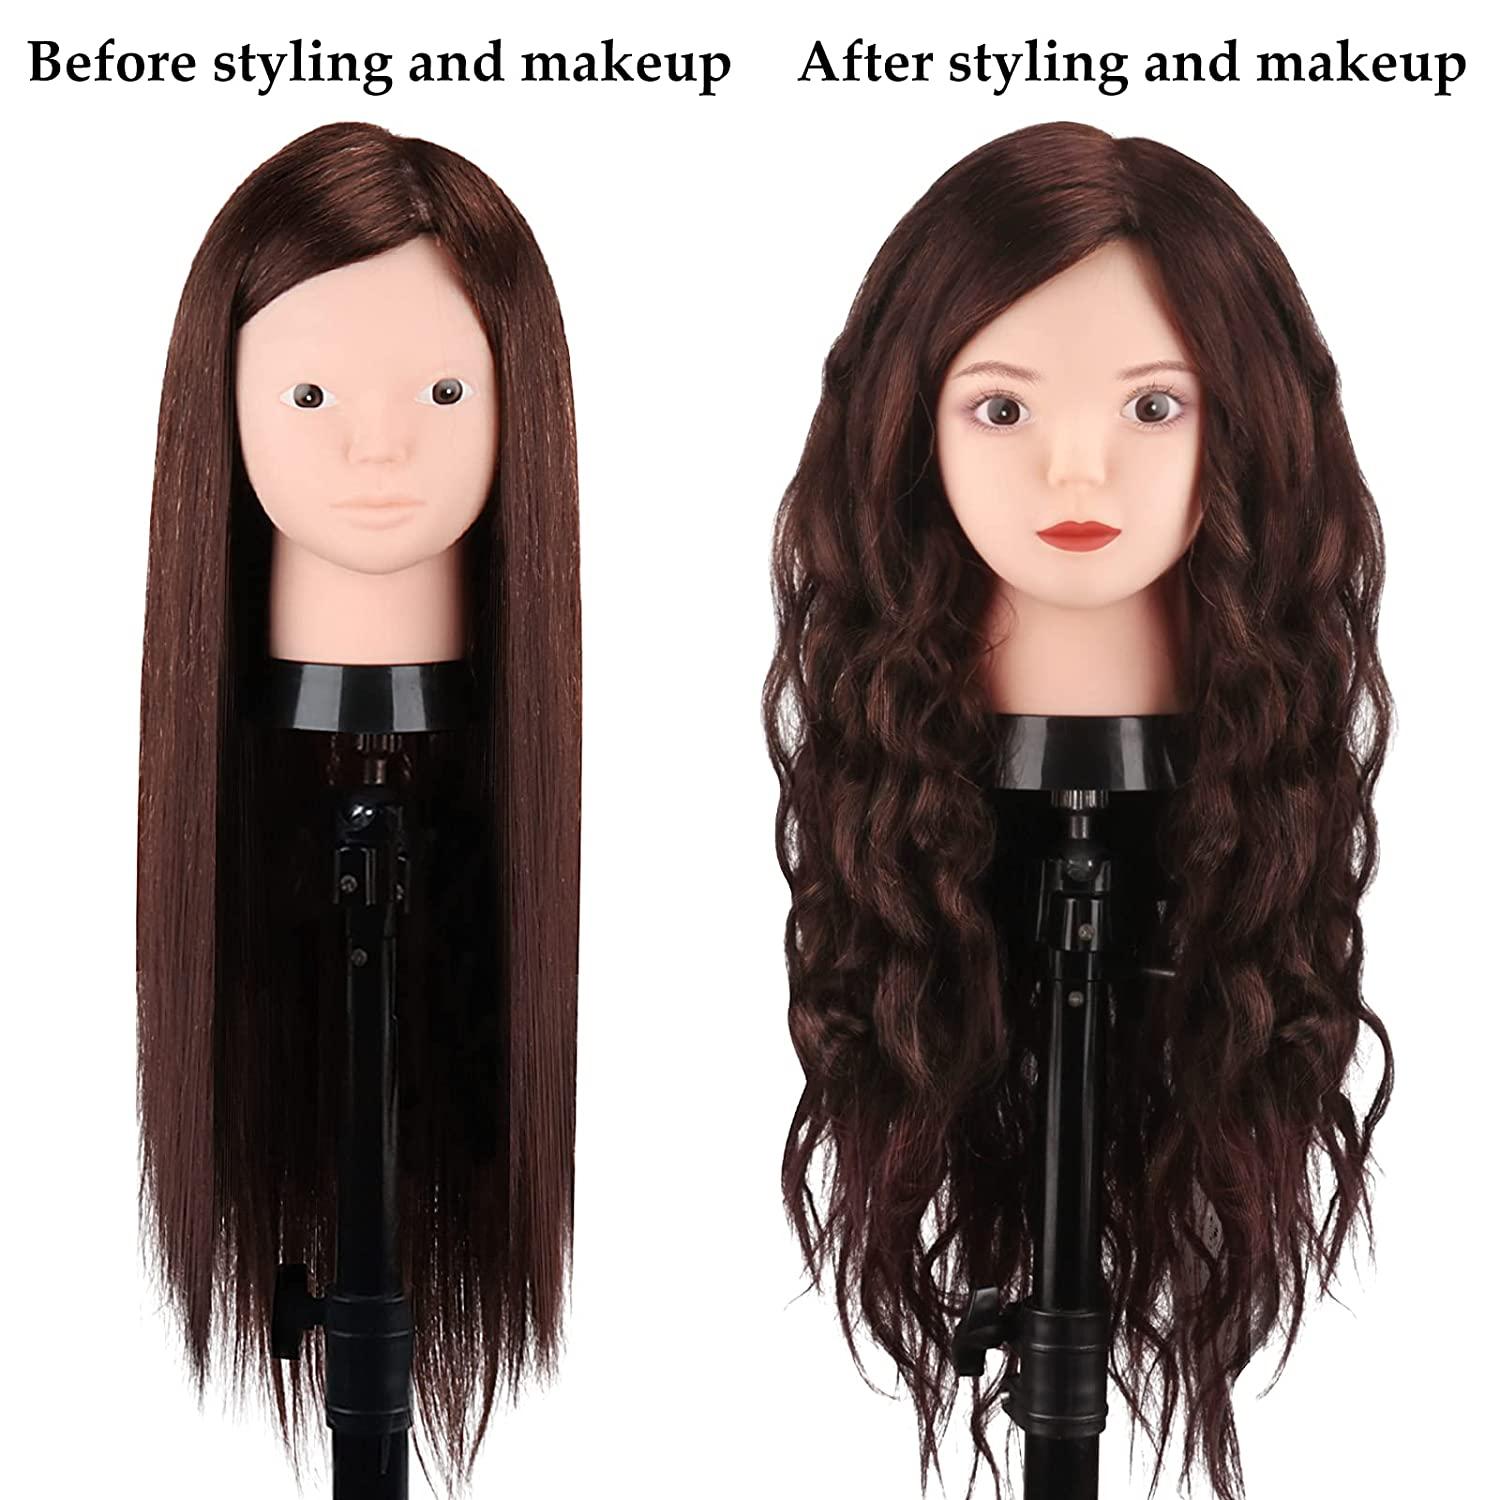 Beauty Star 23.5 Mannequin Head with 80% Real Human Hair, Manikin Doll Head  with Table Clamp Holder + DIY Hair Styling Braid Set, Cosmetology Make-up  Hairdressing Training Head (Dark Brown)